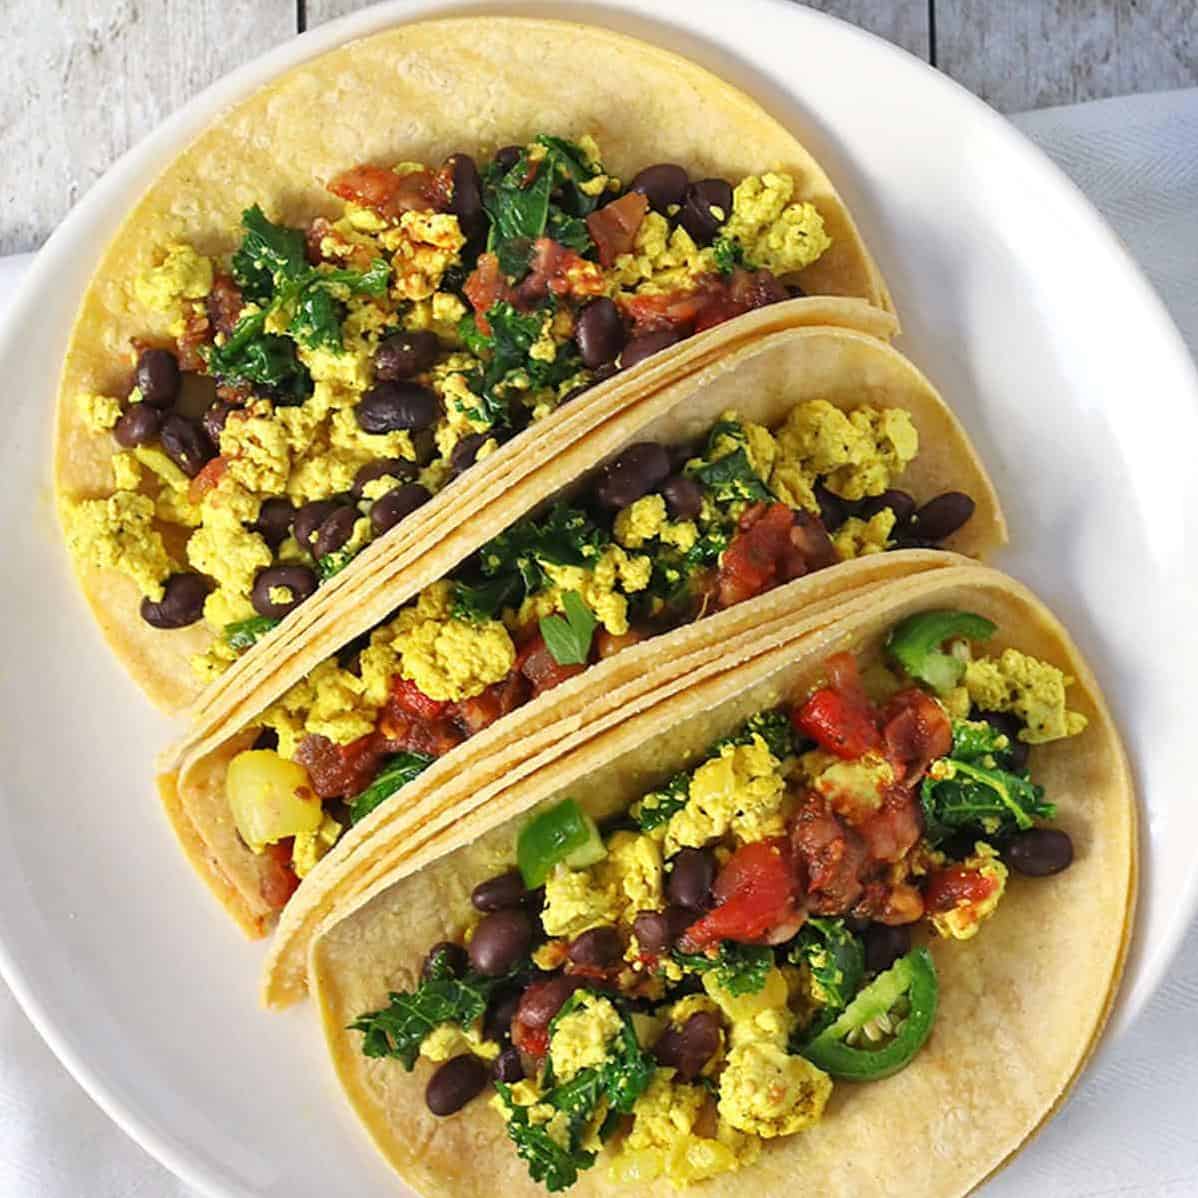  These tacos pack a punch of flavor with every bite!